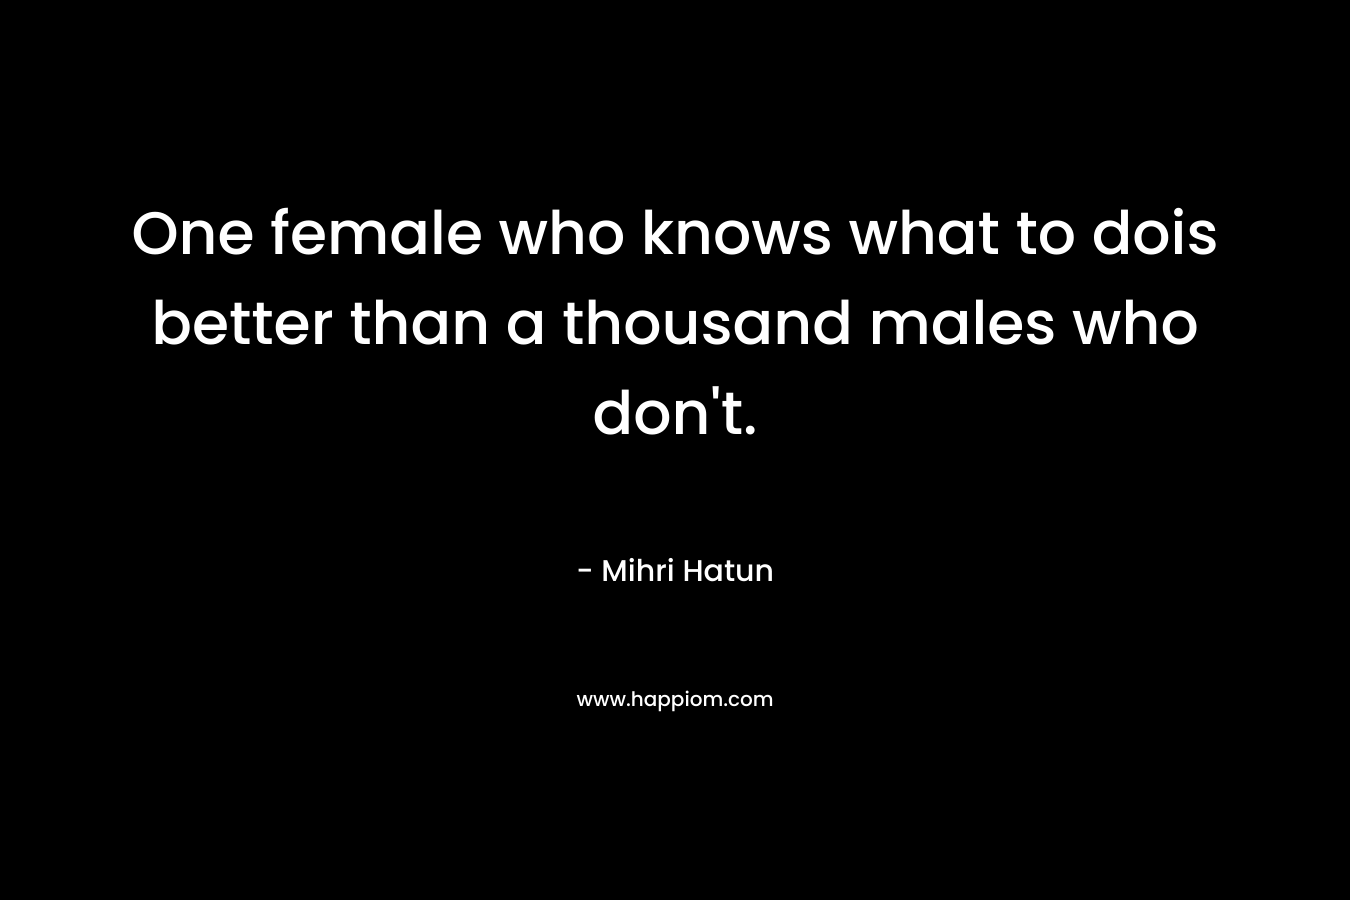 One female who knows what to dois better than a thousand males who don’t. – Mihri Hatun